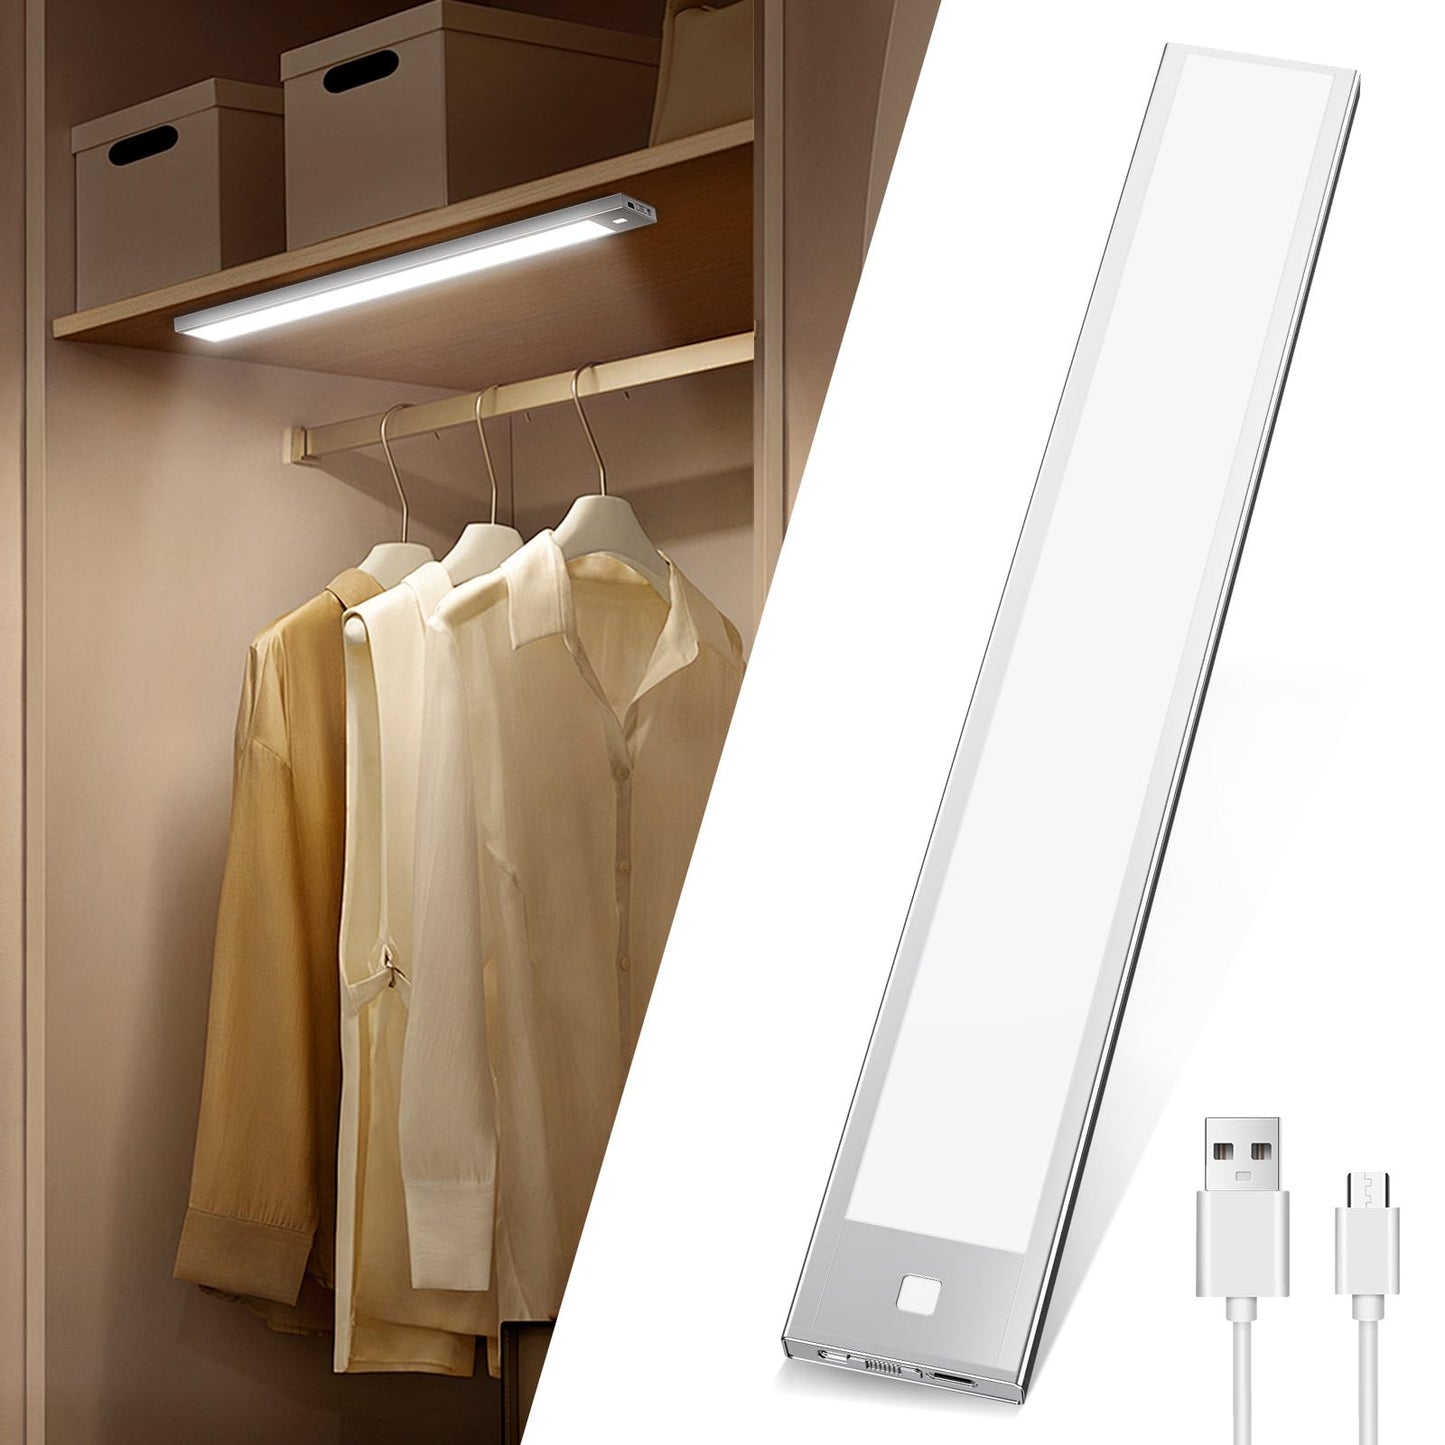 Send inquiry for a 5V Rechargeable Motion Sensor Light 2200mAh Battery Operated Shelf Lights for Indoor Illumination 11.8inch to high quality Rechargeable Motion Sensor Light supplier. Wholesale Battery Operated Shelf Lights directly from China Battery Operated Shelf Lights manufacturers/exporters. Get factory sale price list and become a distributor/agent-vstled.com